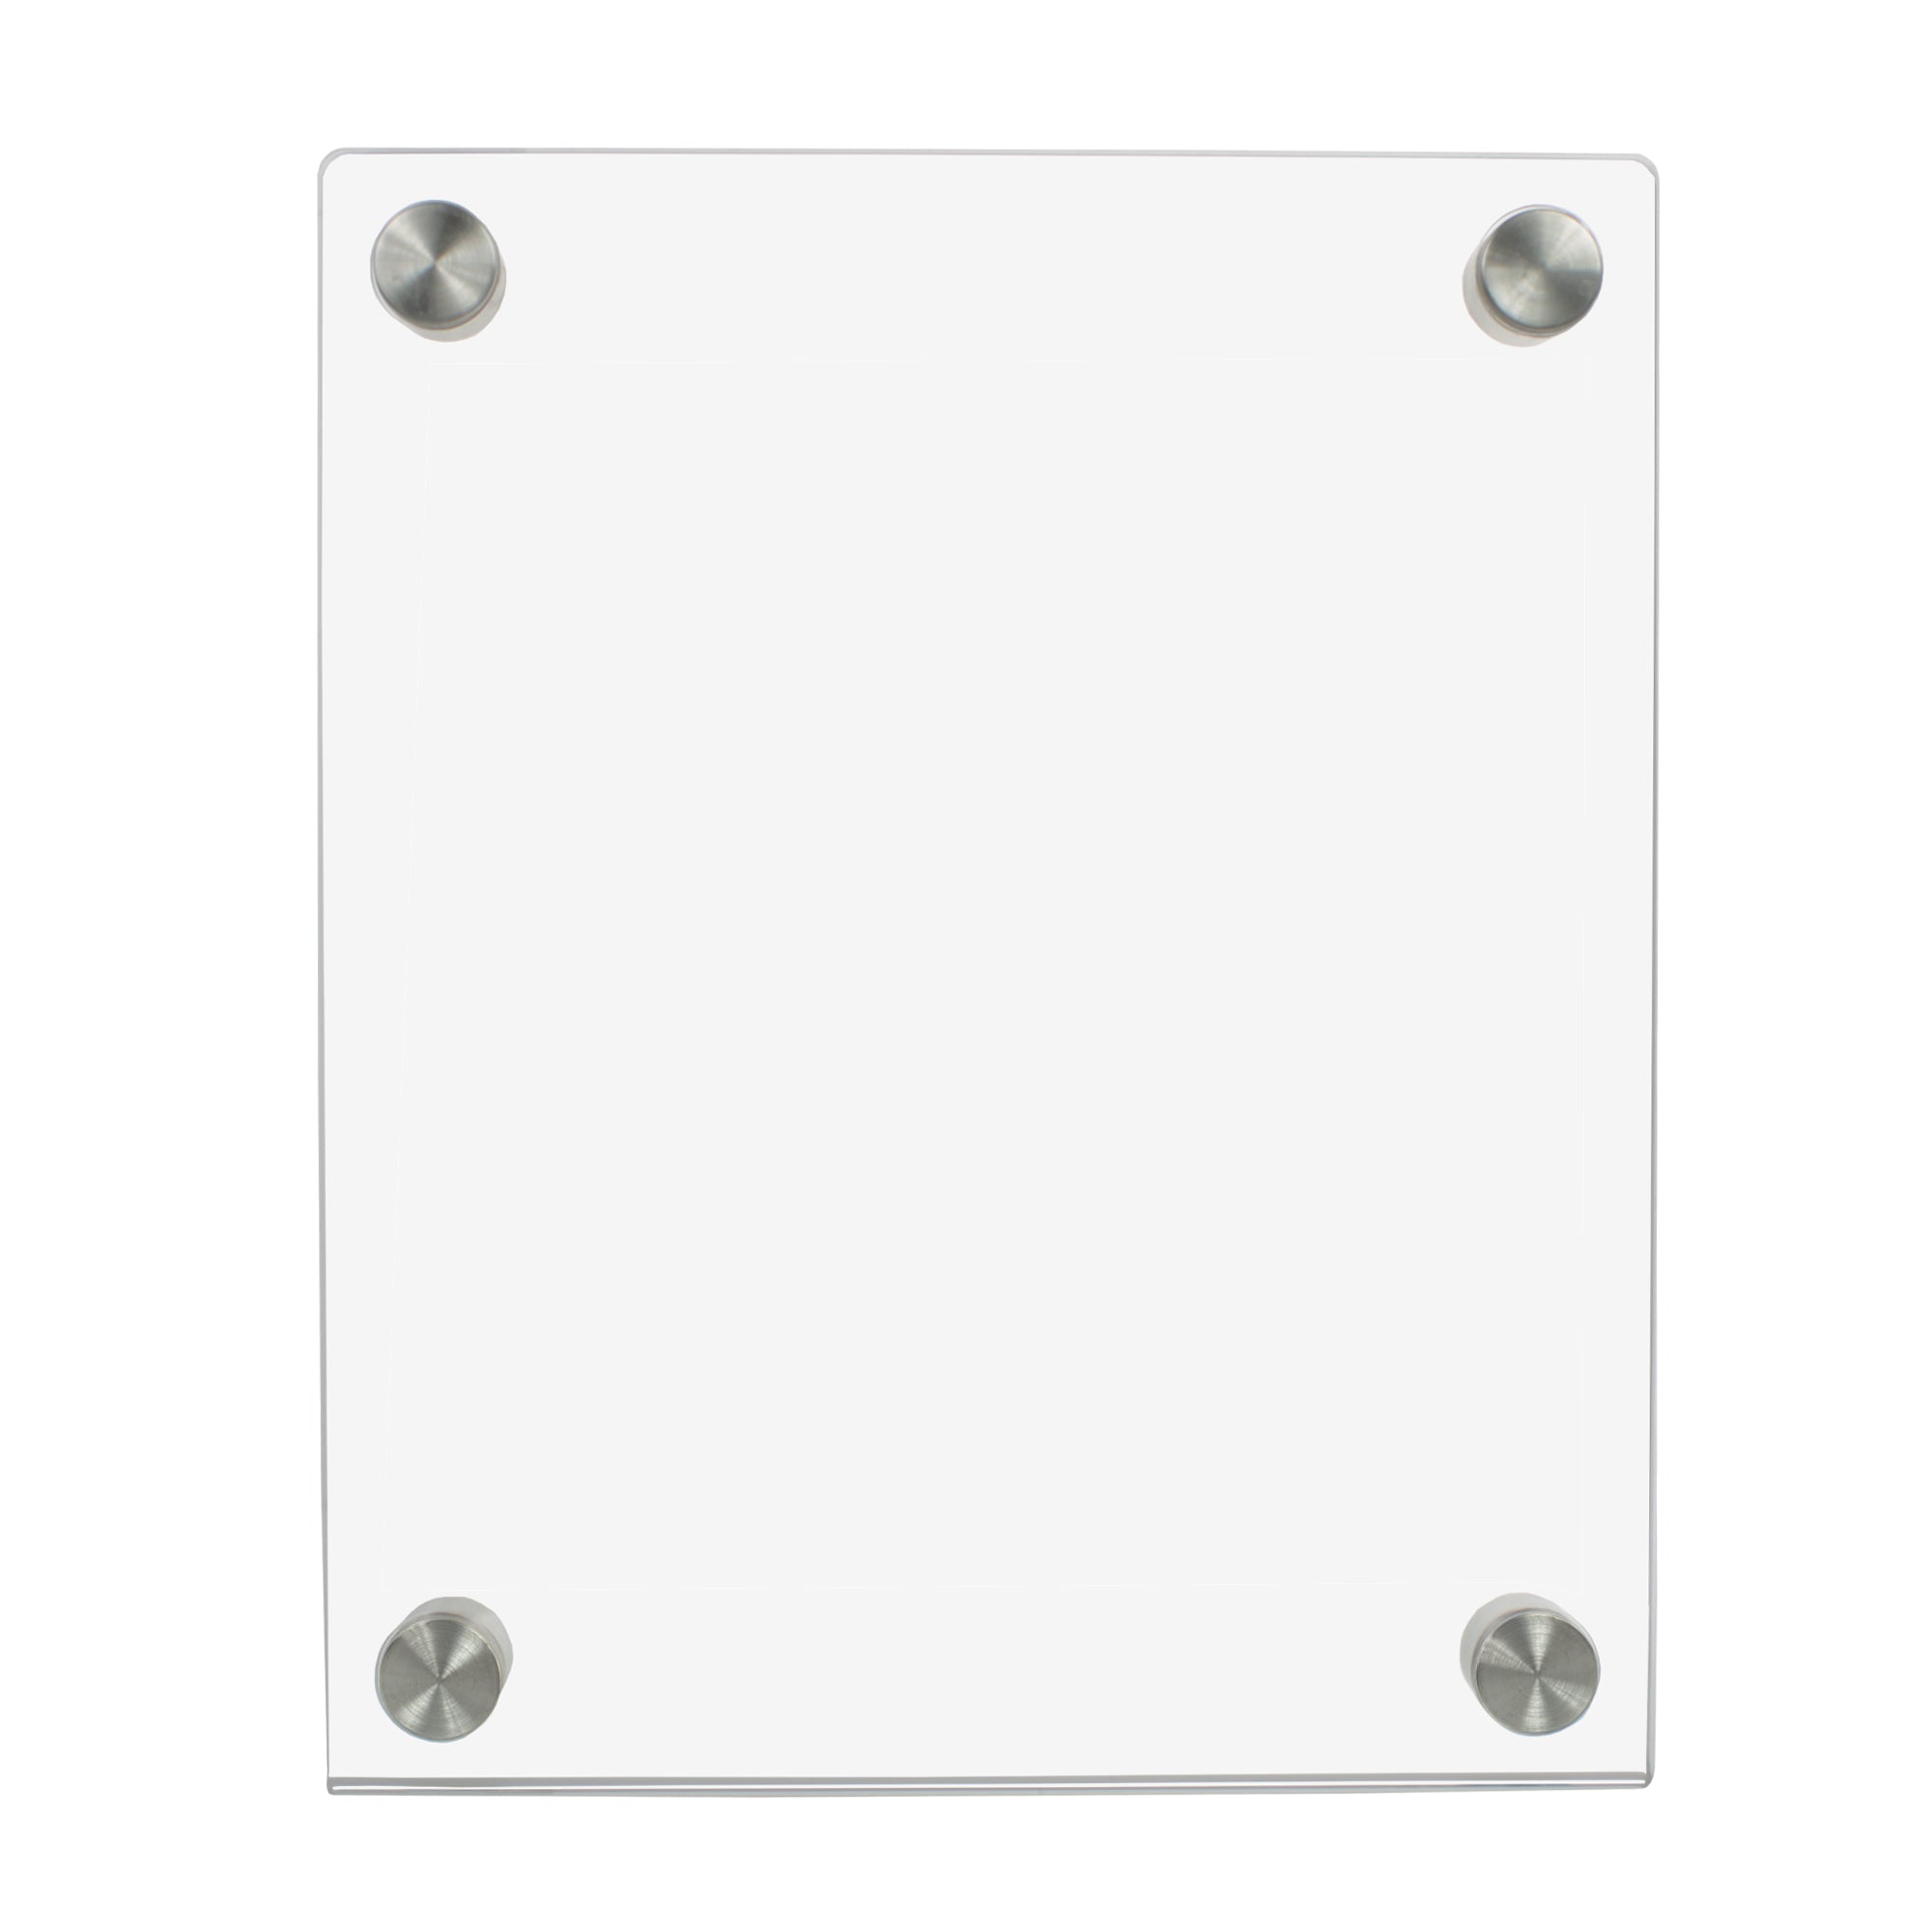 Acrylic Floor Standing 8.5 x 11 Sign Holder with Standoffs